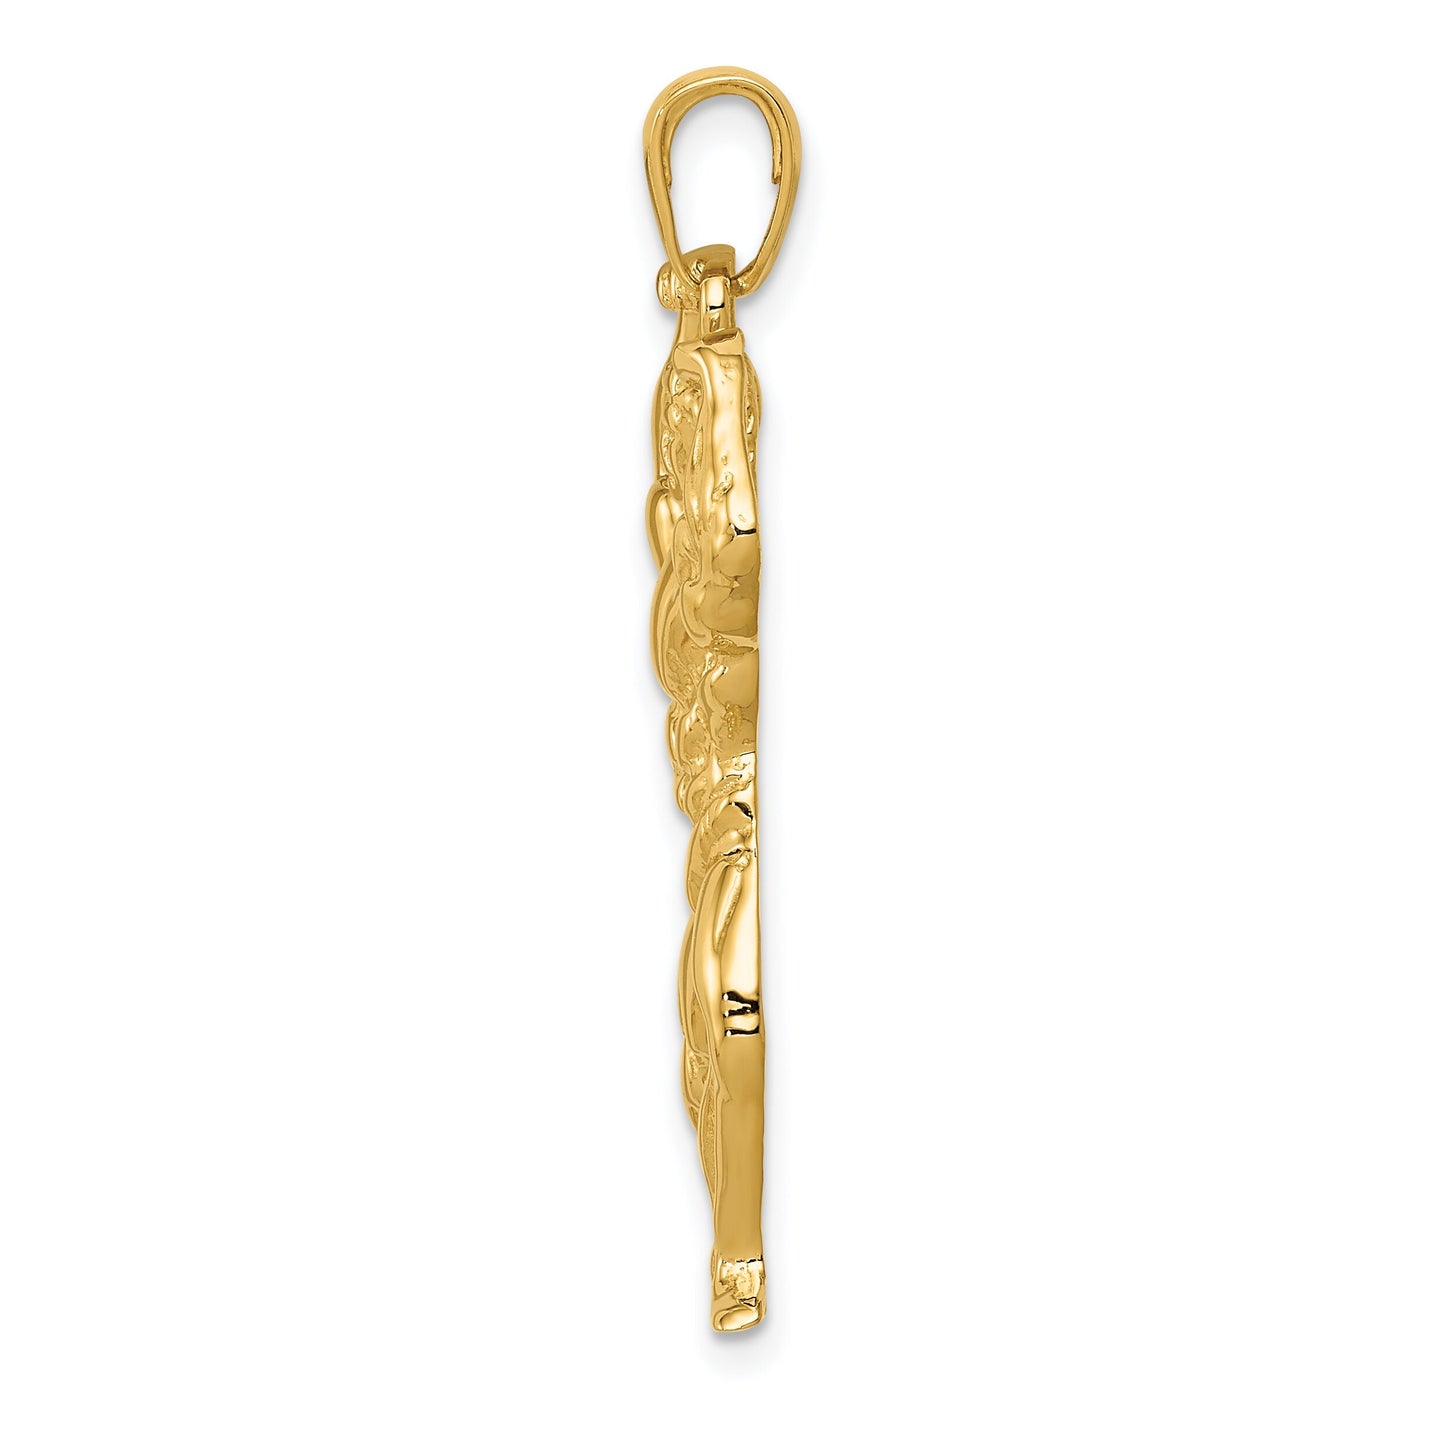 14K Gold Polished Weightlifter Charm